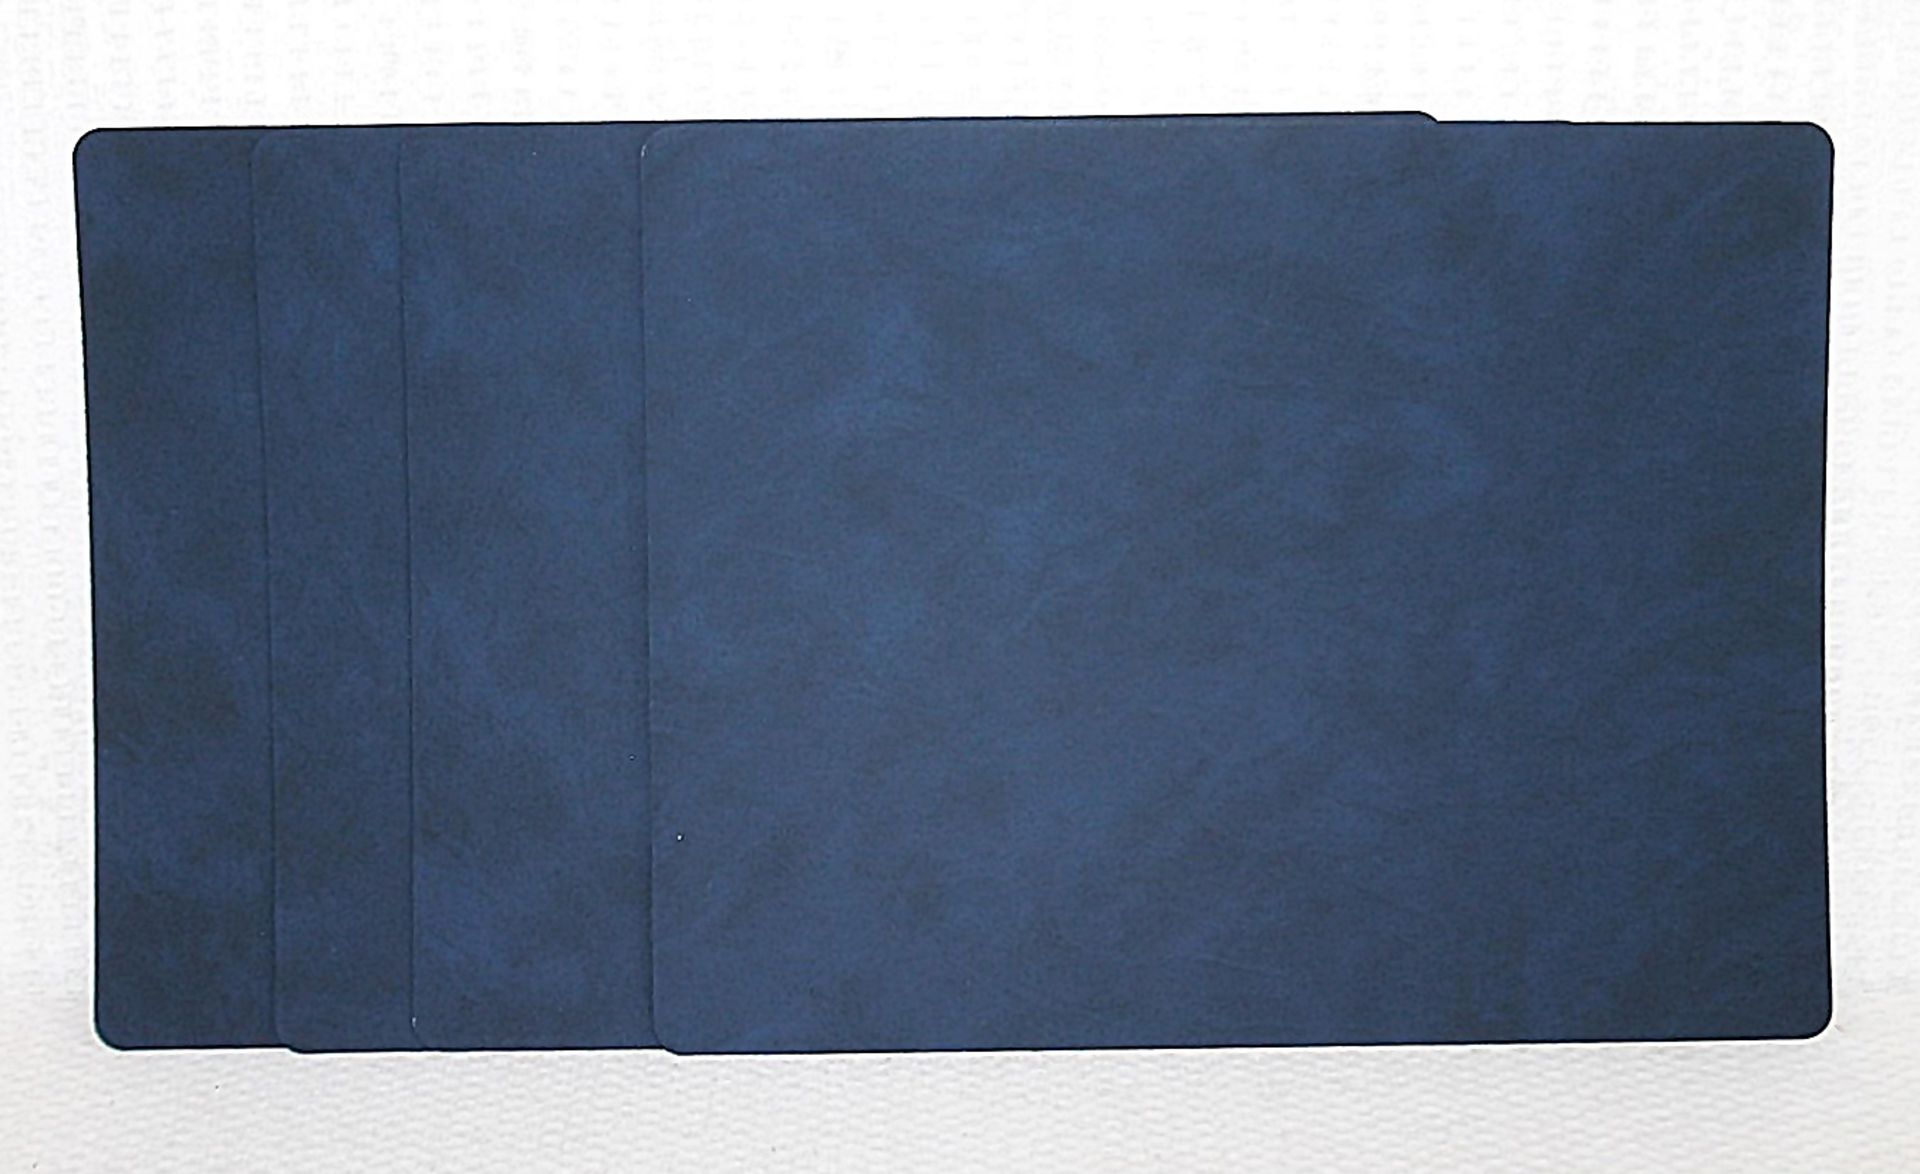 Set Of 4 x LINDDNA Recycled Leather Rectangular Placemats In Midnight Blue - Original Price £72.95 - Image 3 of 7